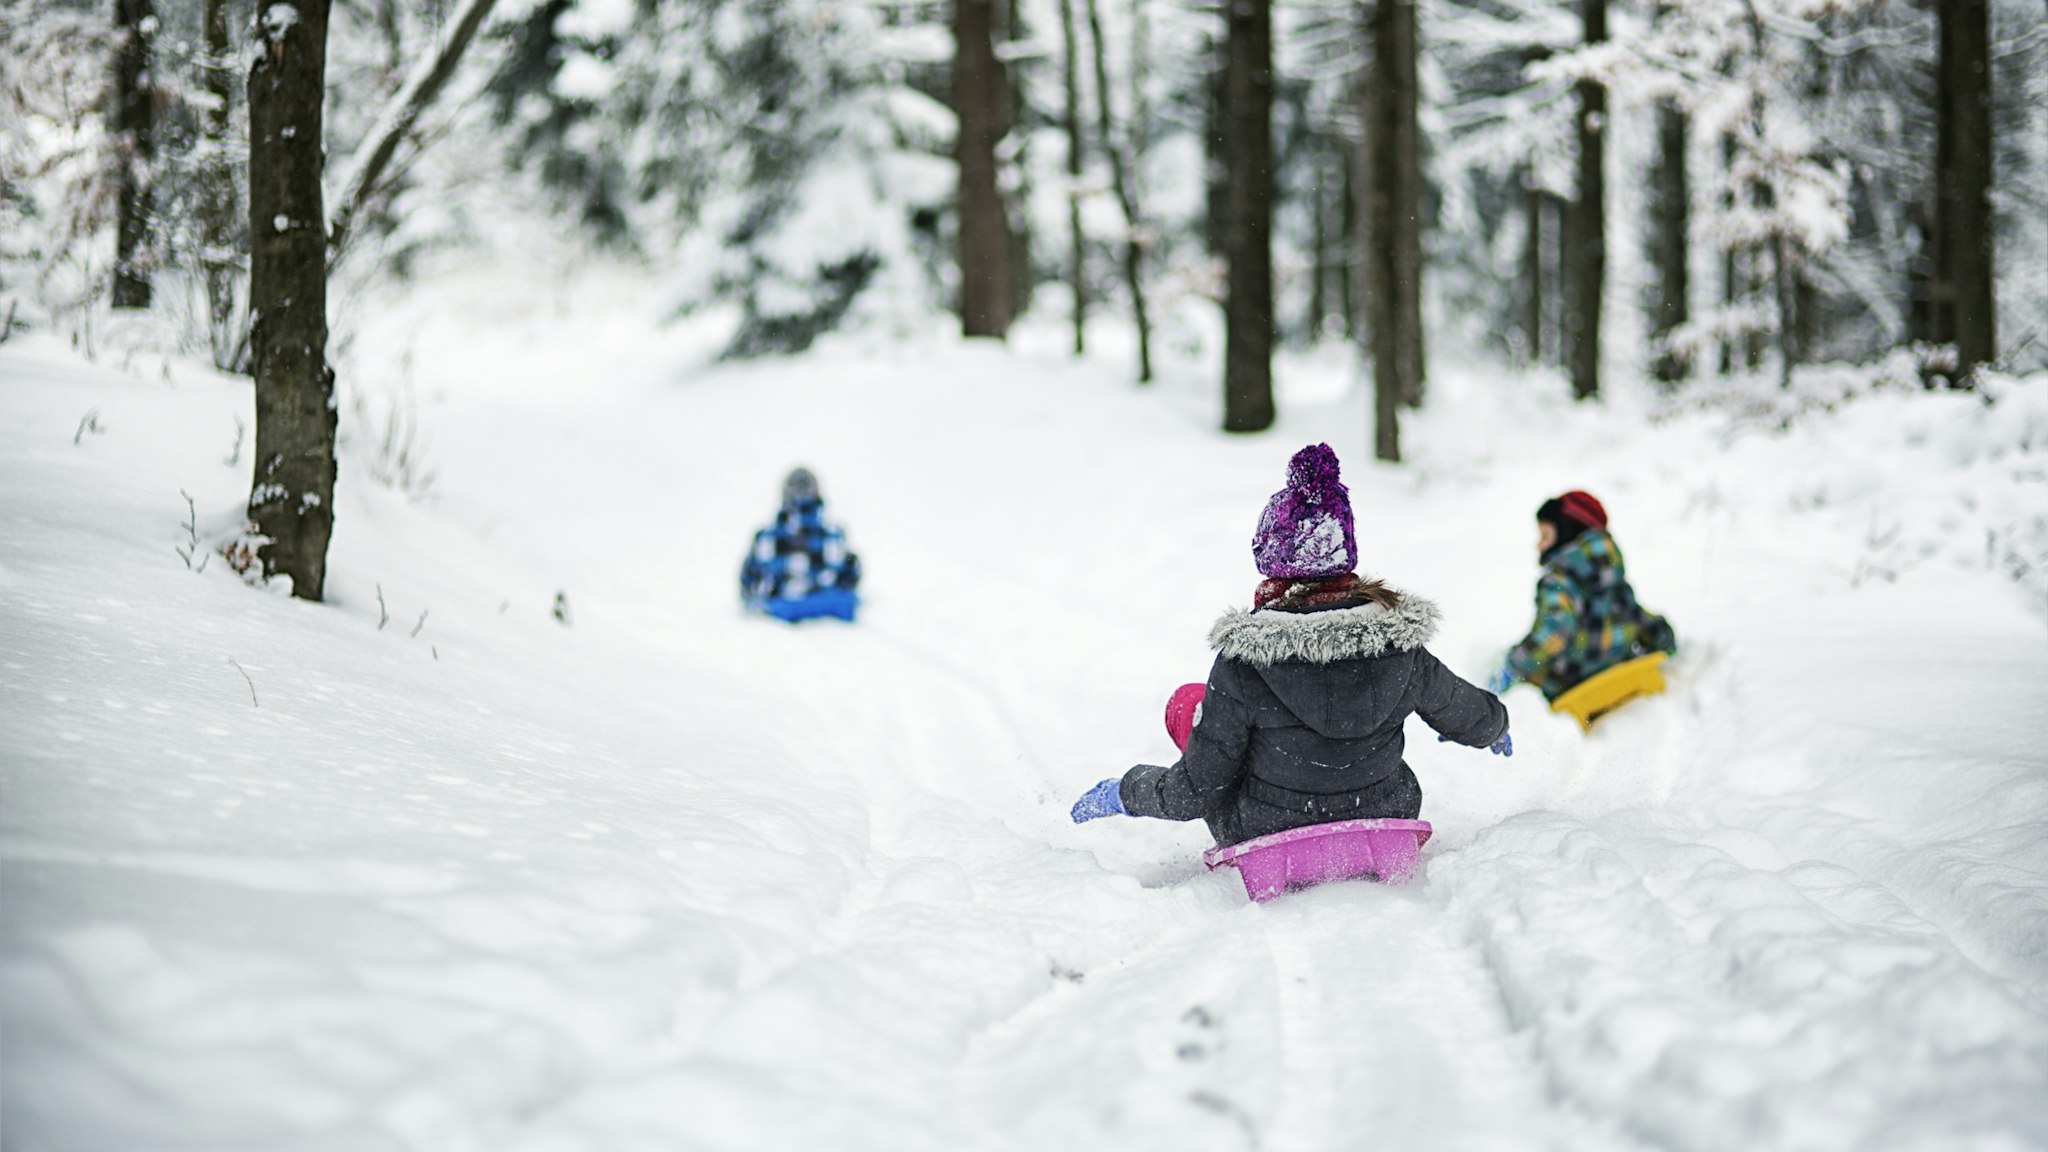 Three kids tobogganing on snowy path in winter forest, Cold winter day. Back view.